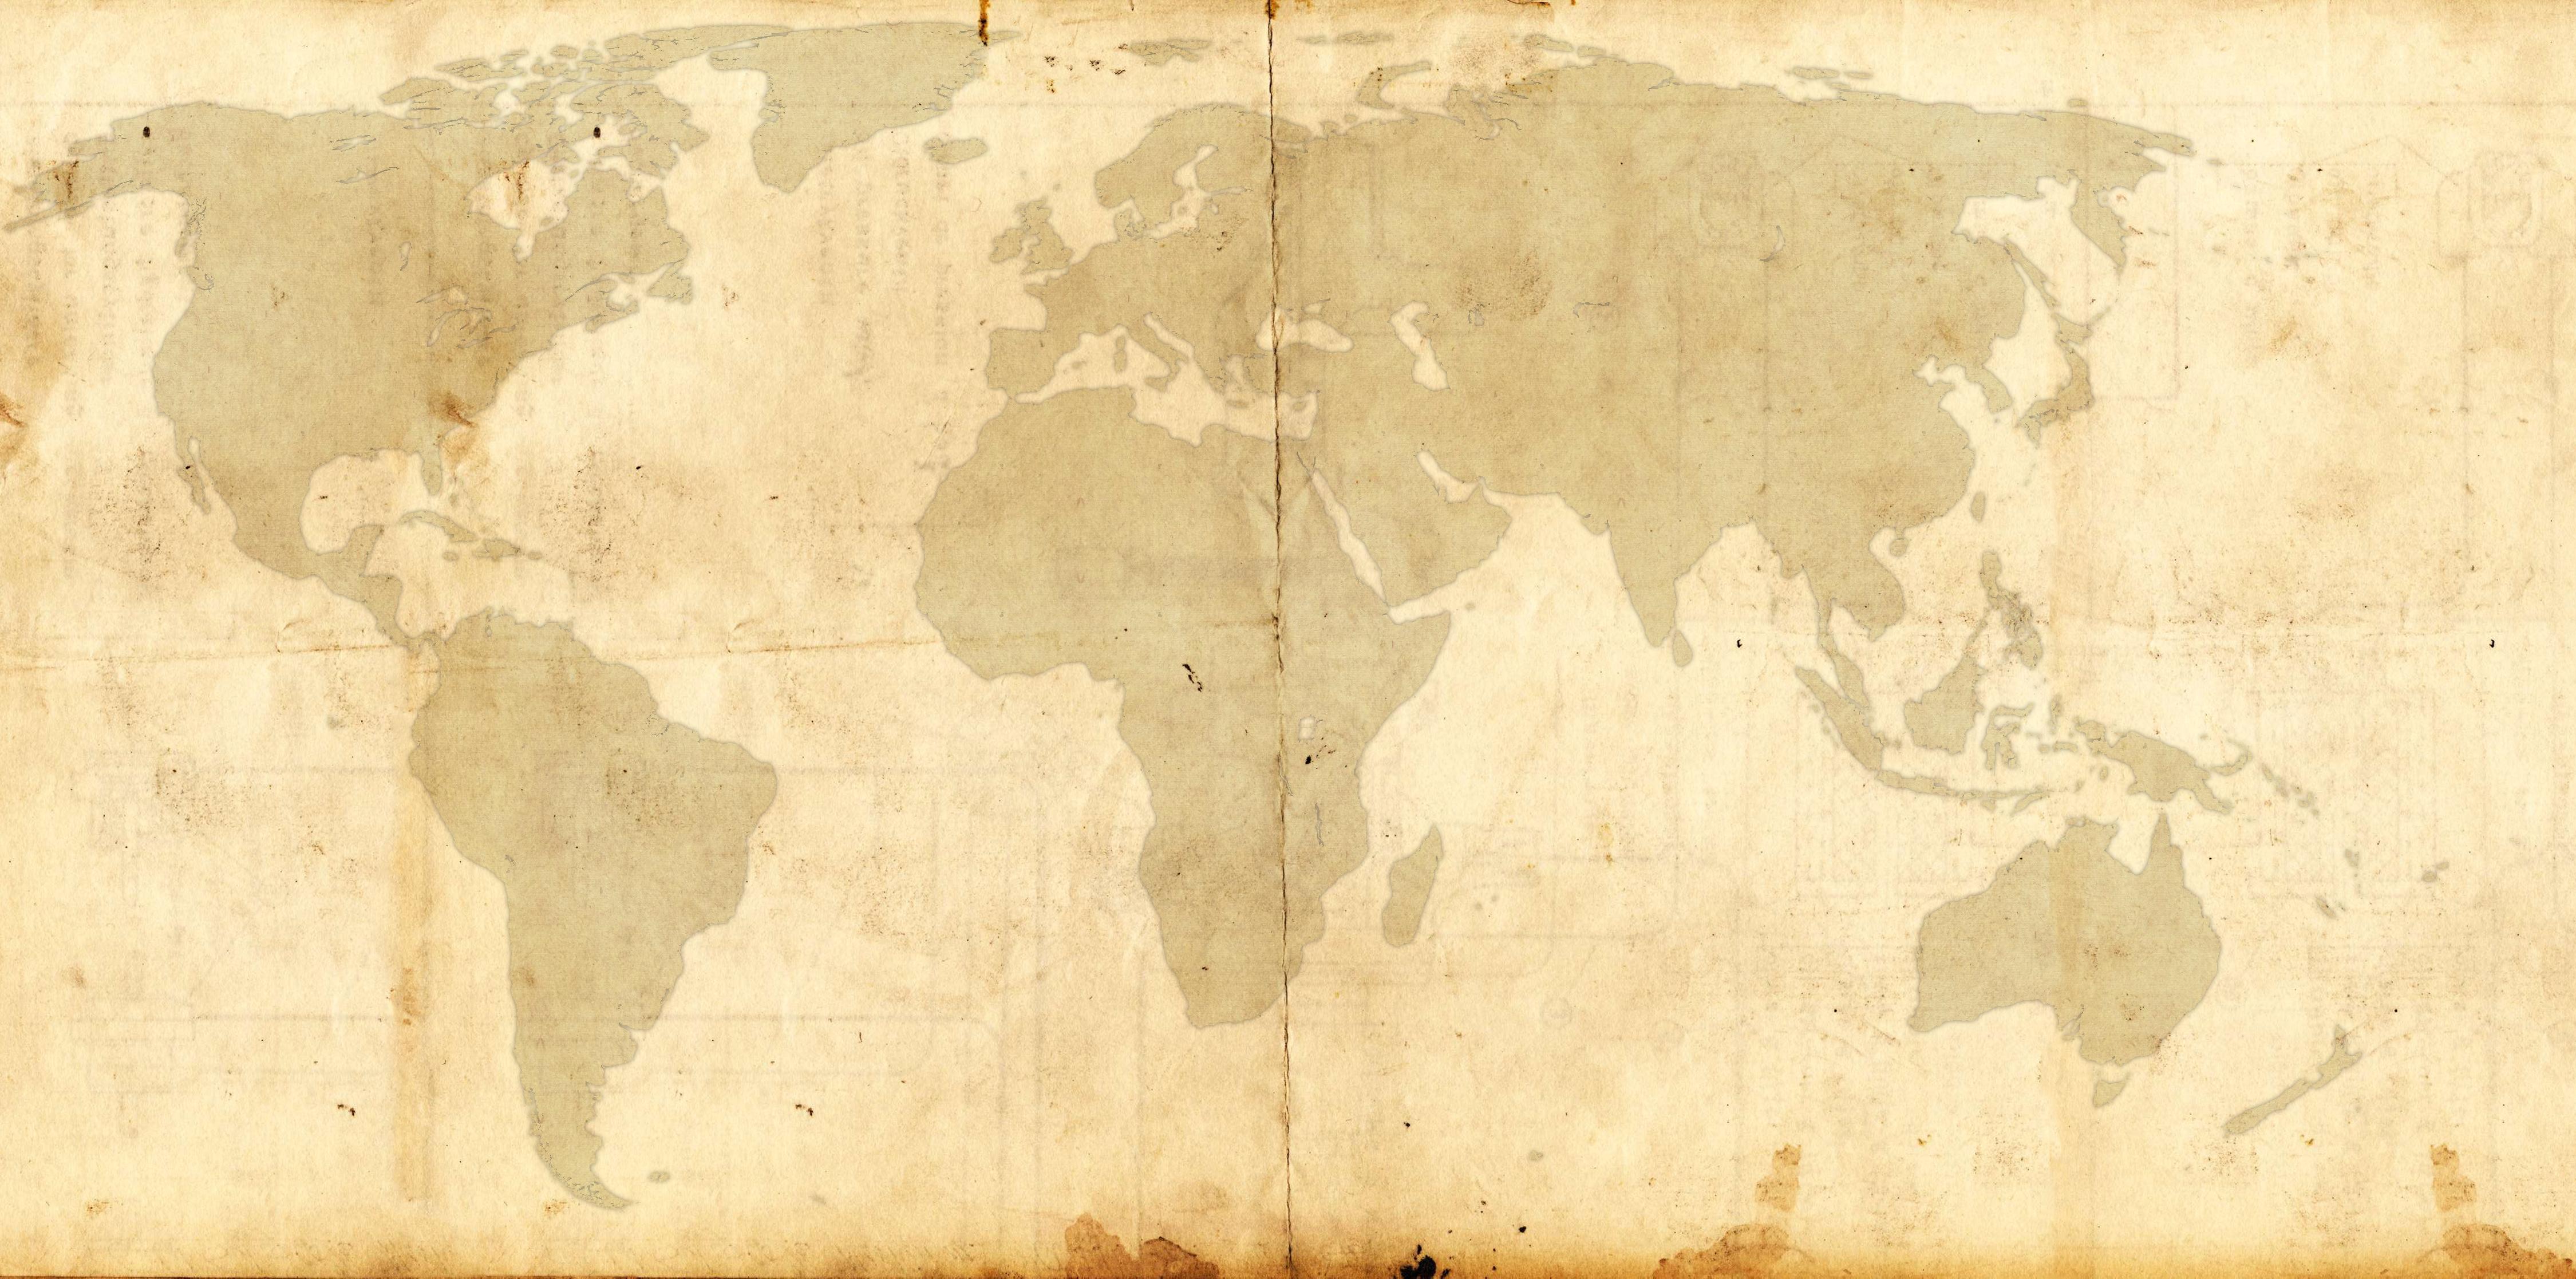 4500 x 2234 · jpeg - World Map Template - Steampunk/Victorian Style by FloppyBootStomp on ...